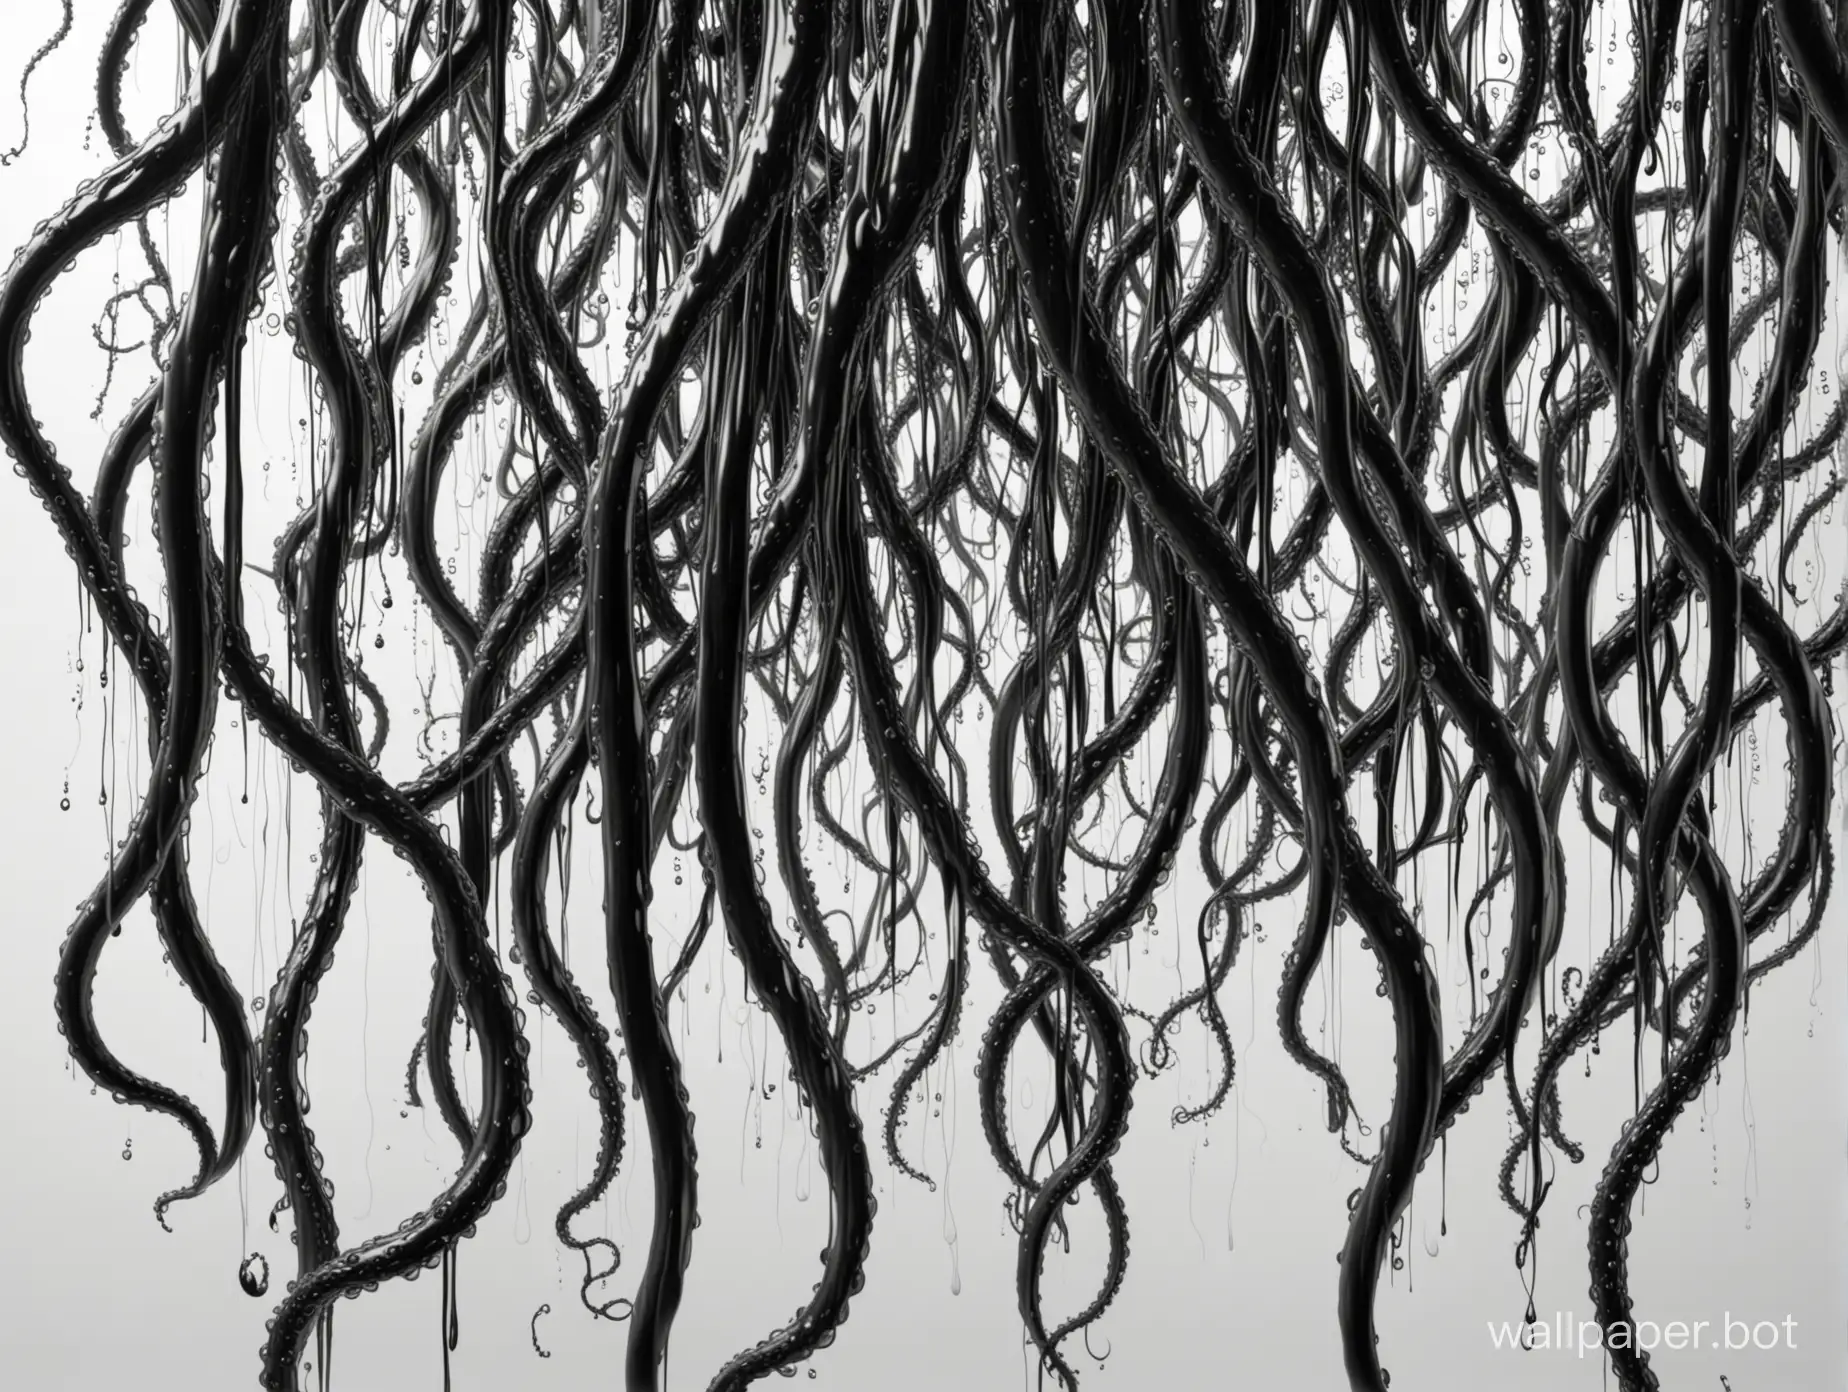 Organic-Black-Tentacles-with-Intricate-Ornamental-Chaos-on-White-Background